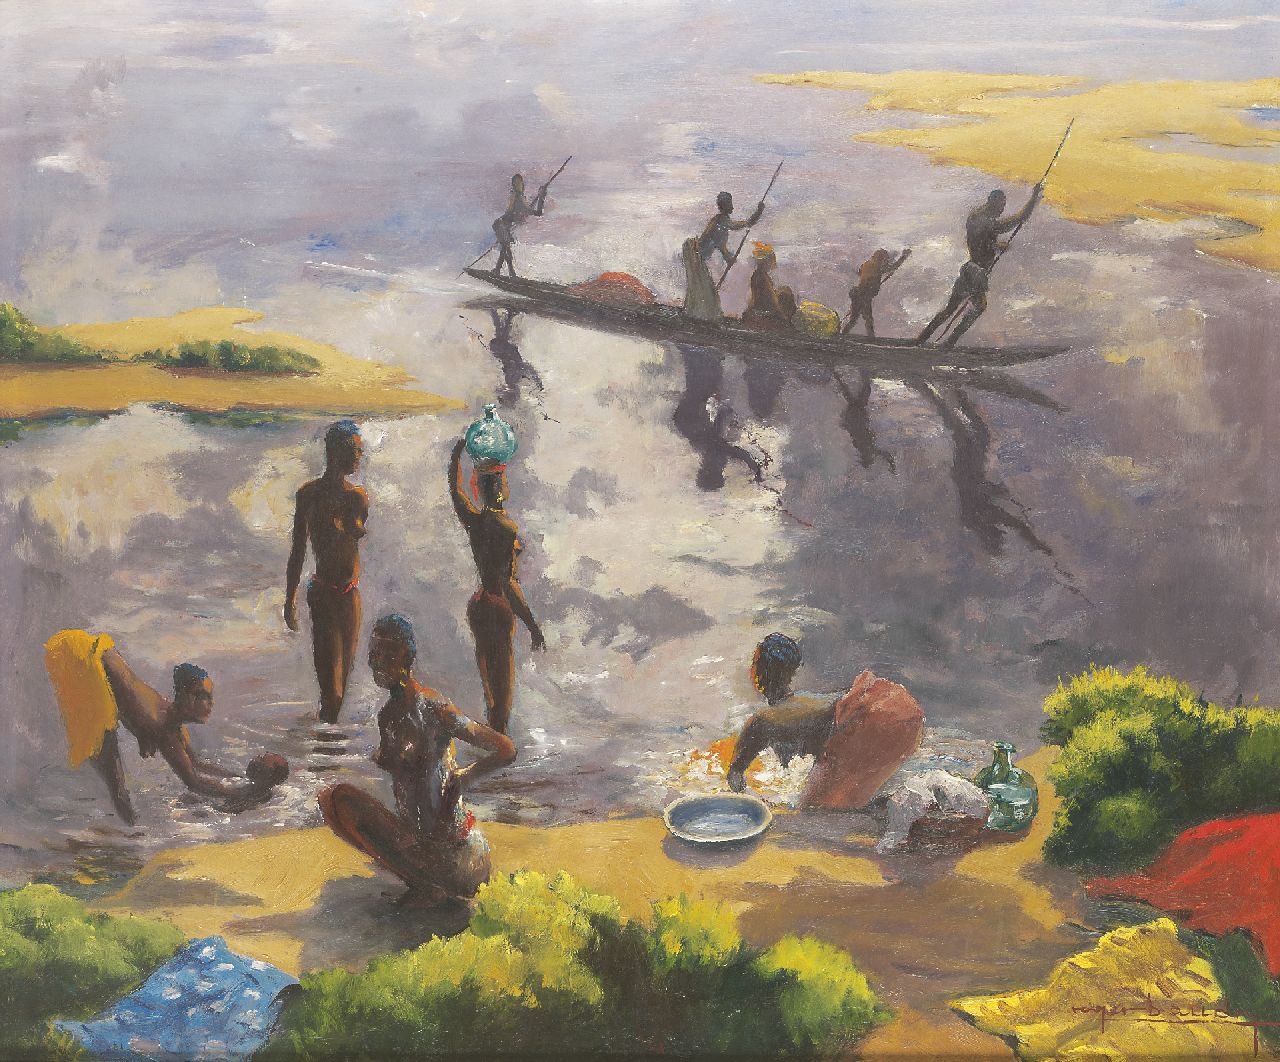 Baudry R.  | Roger Baudry, African women bathing, oil on painter's board 78.0 x 93.7 cm, signed l.r.